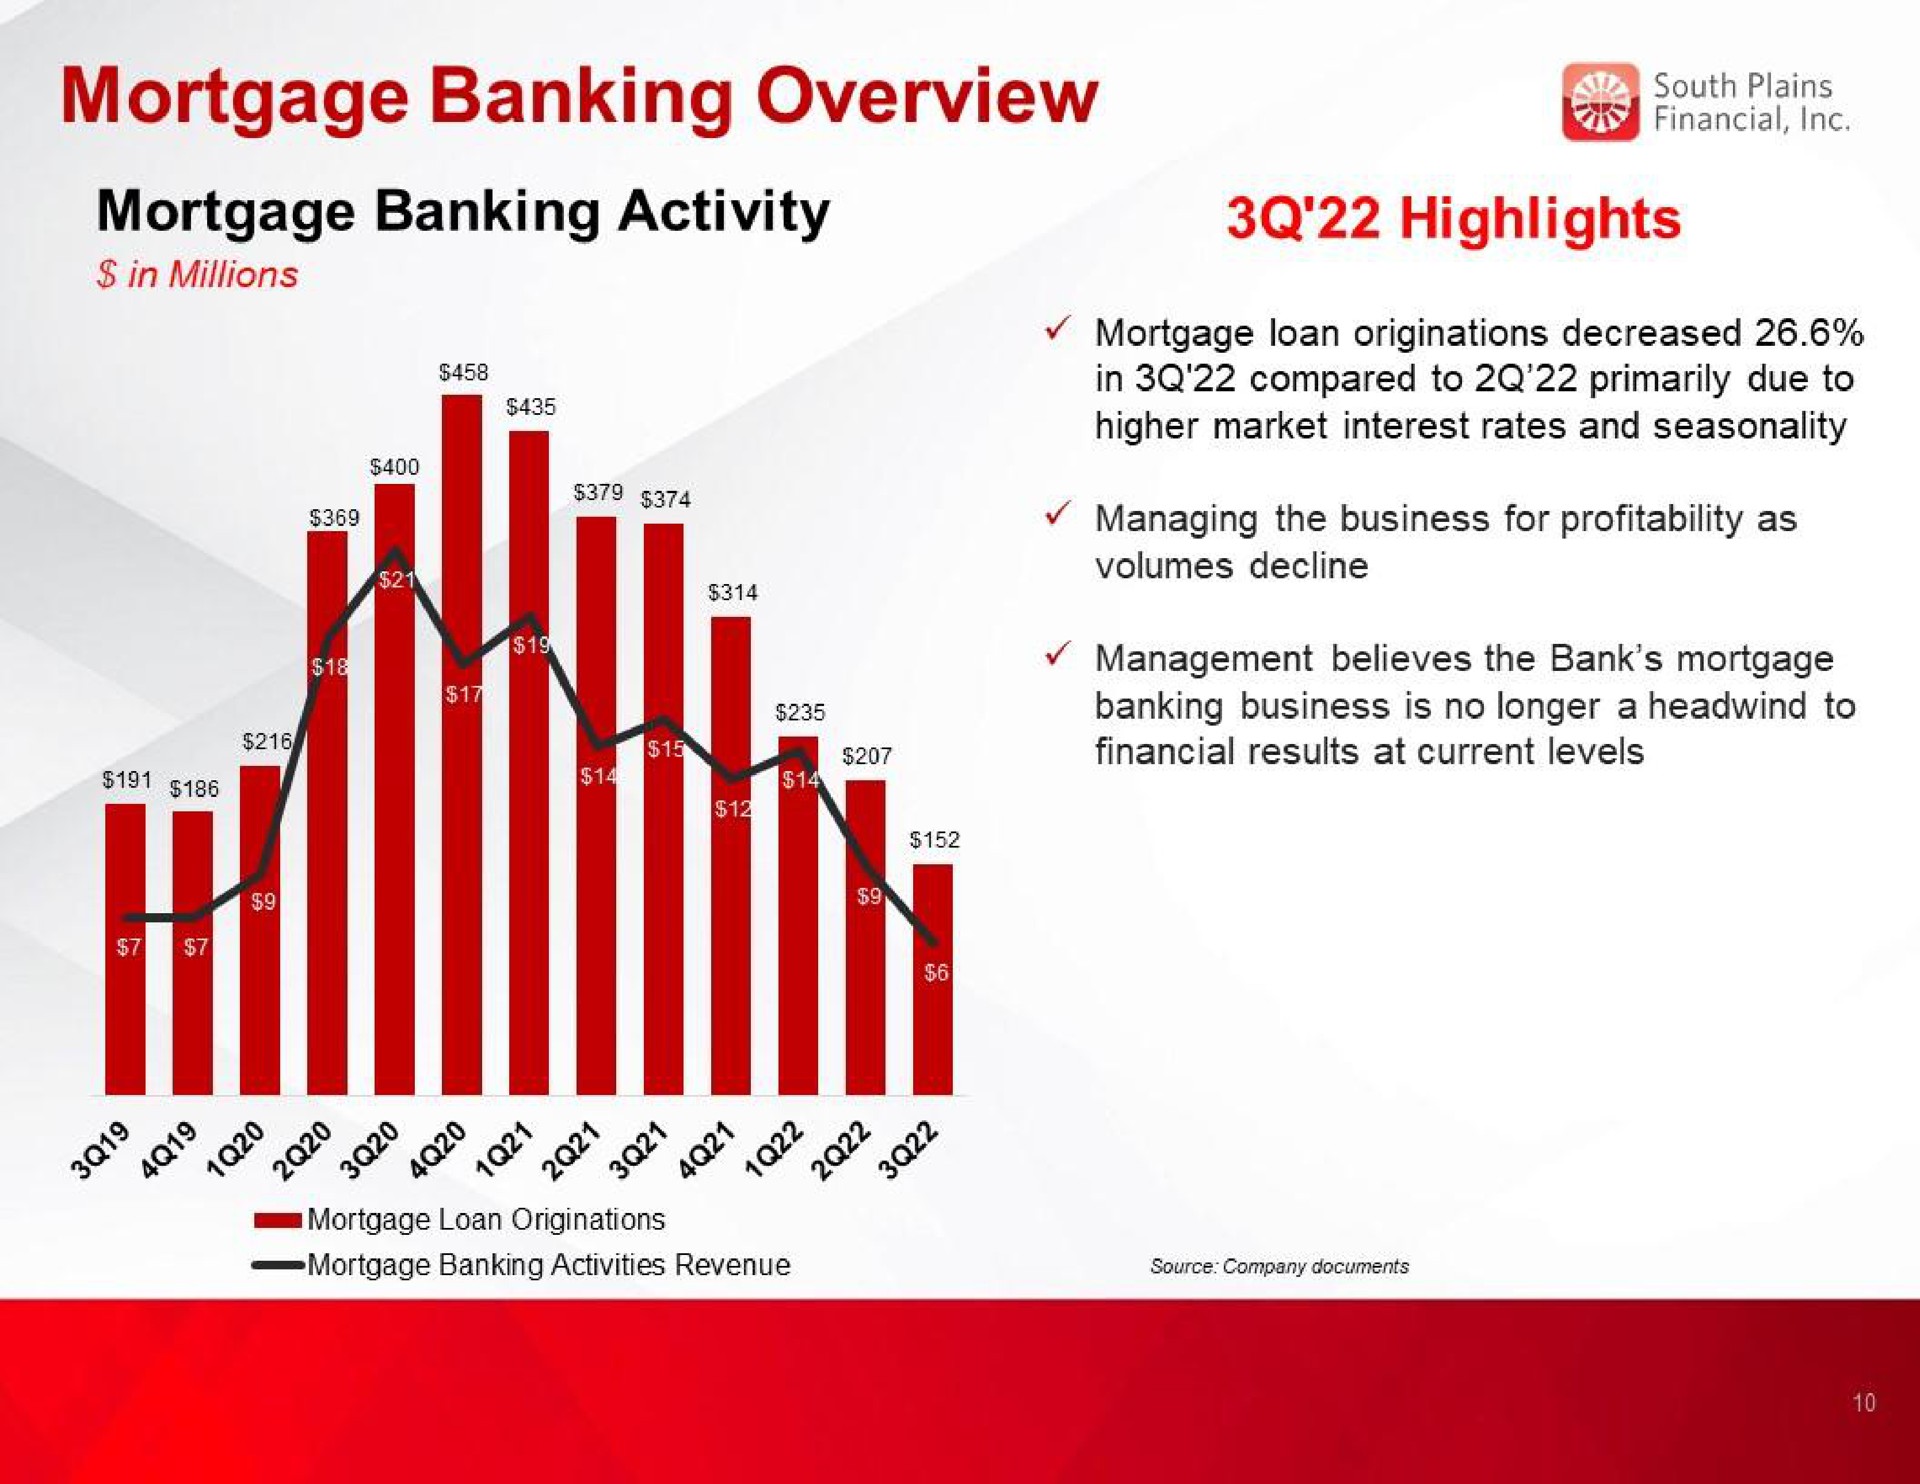 mortgage banking overview mortgage banking activity highlights if | South Plains Financial